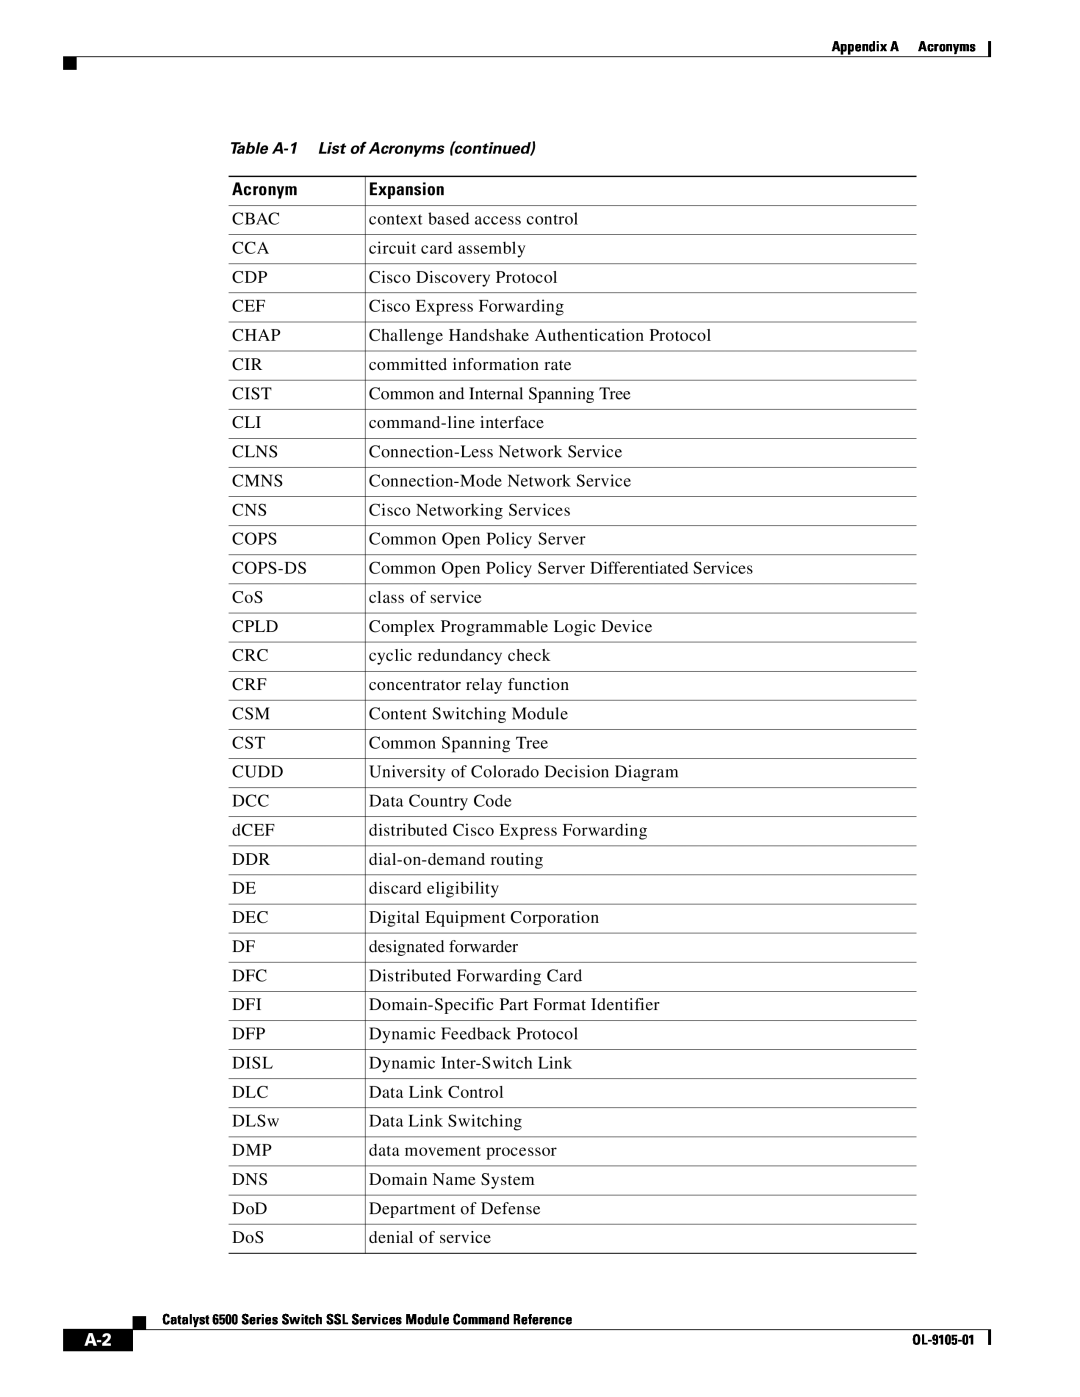 Cisco Systems 6500 manual Expansion, Table A-1 List of Acronyms continued 